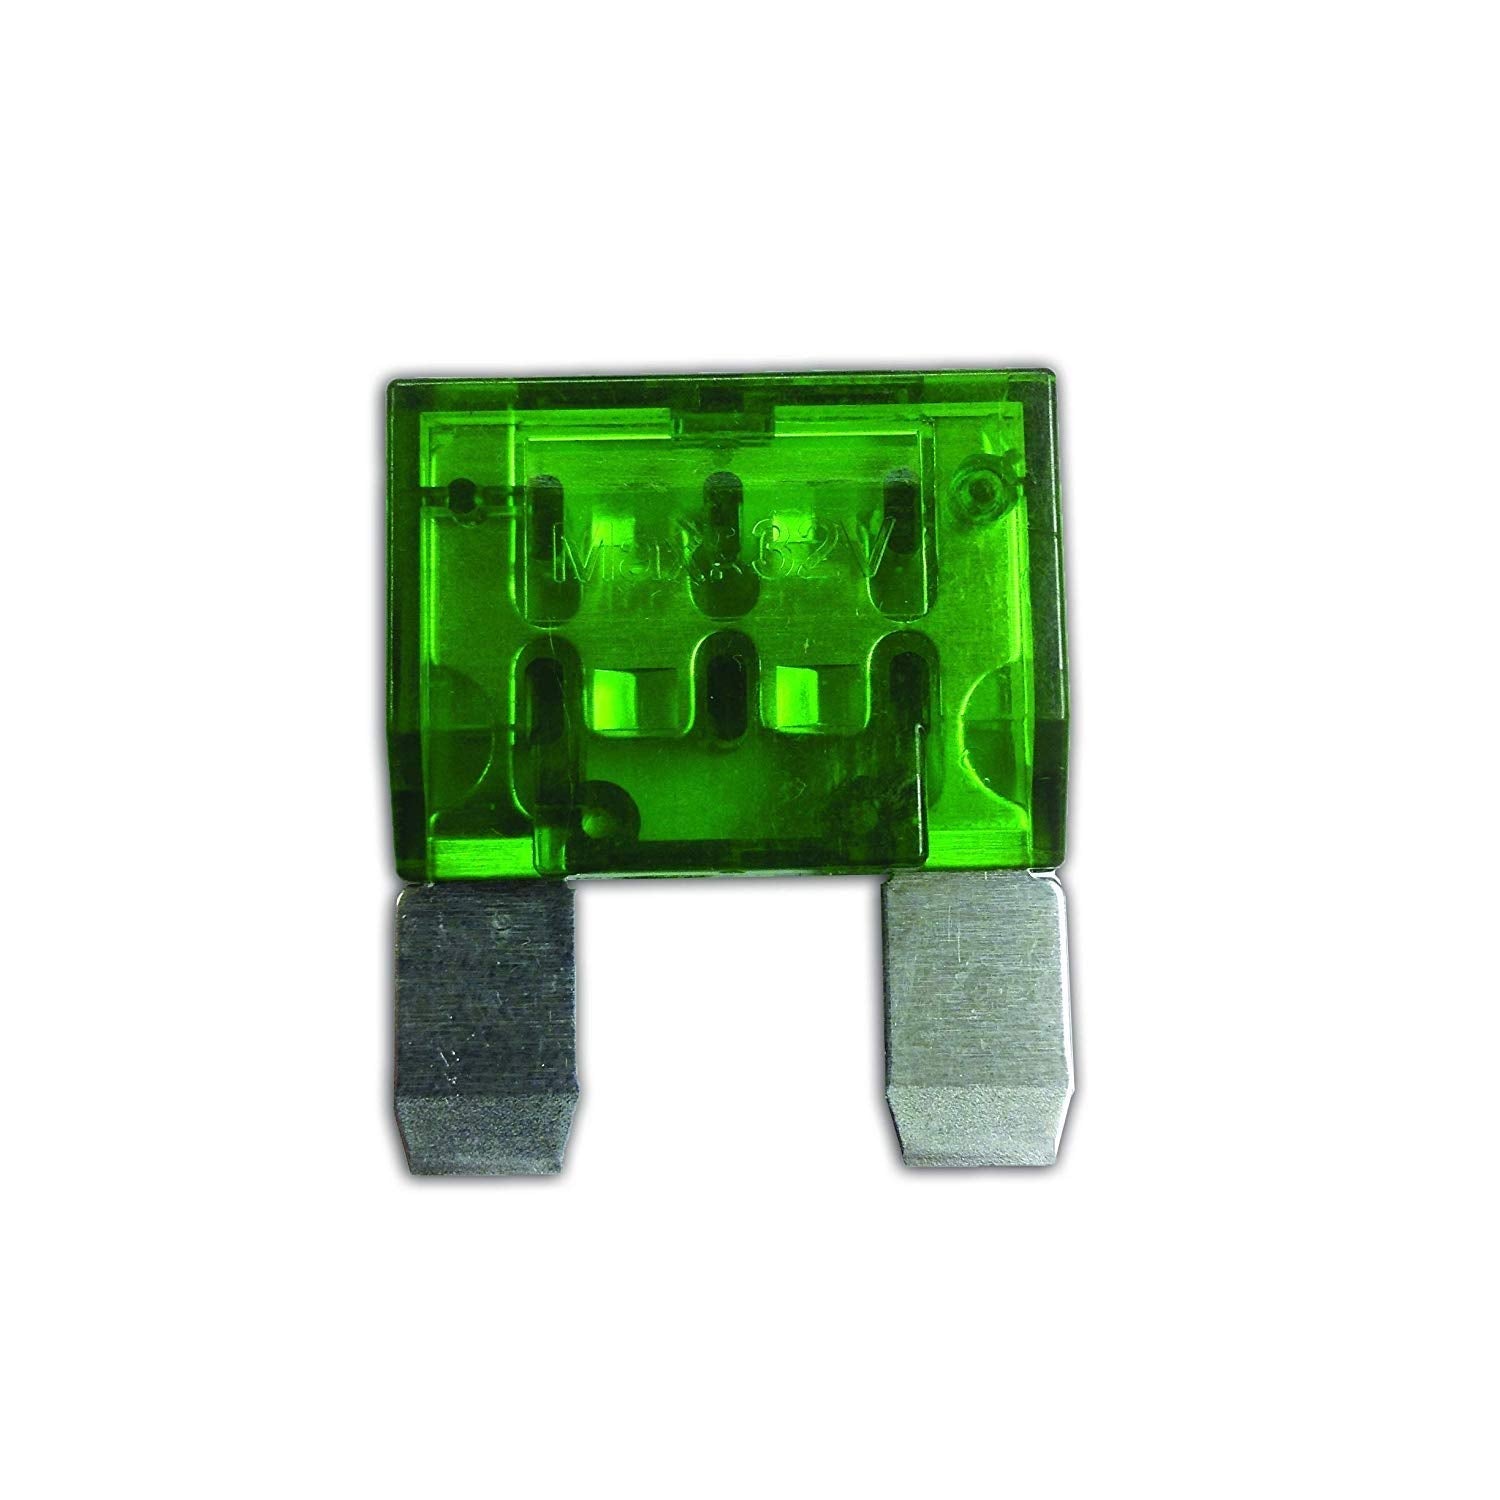 WirthCo 24560 Maxi Standard Blade Fuse, 2 Pack